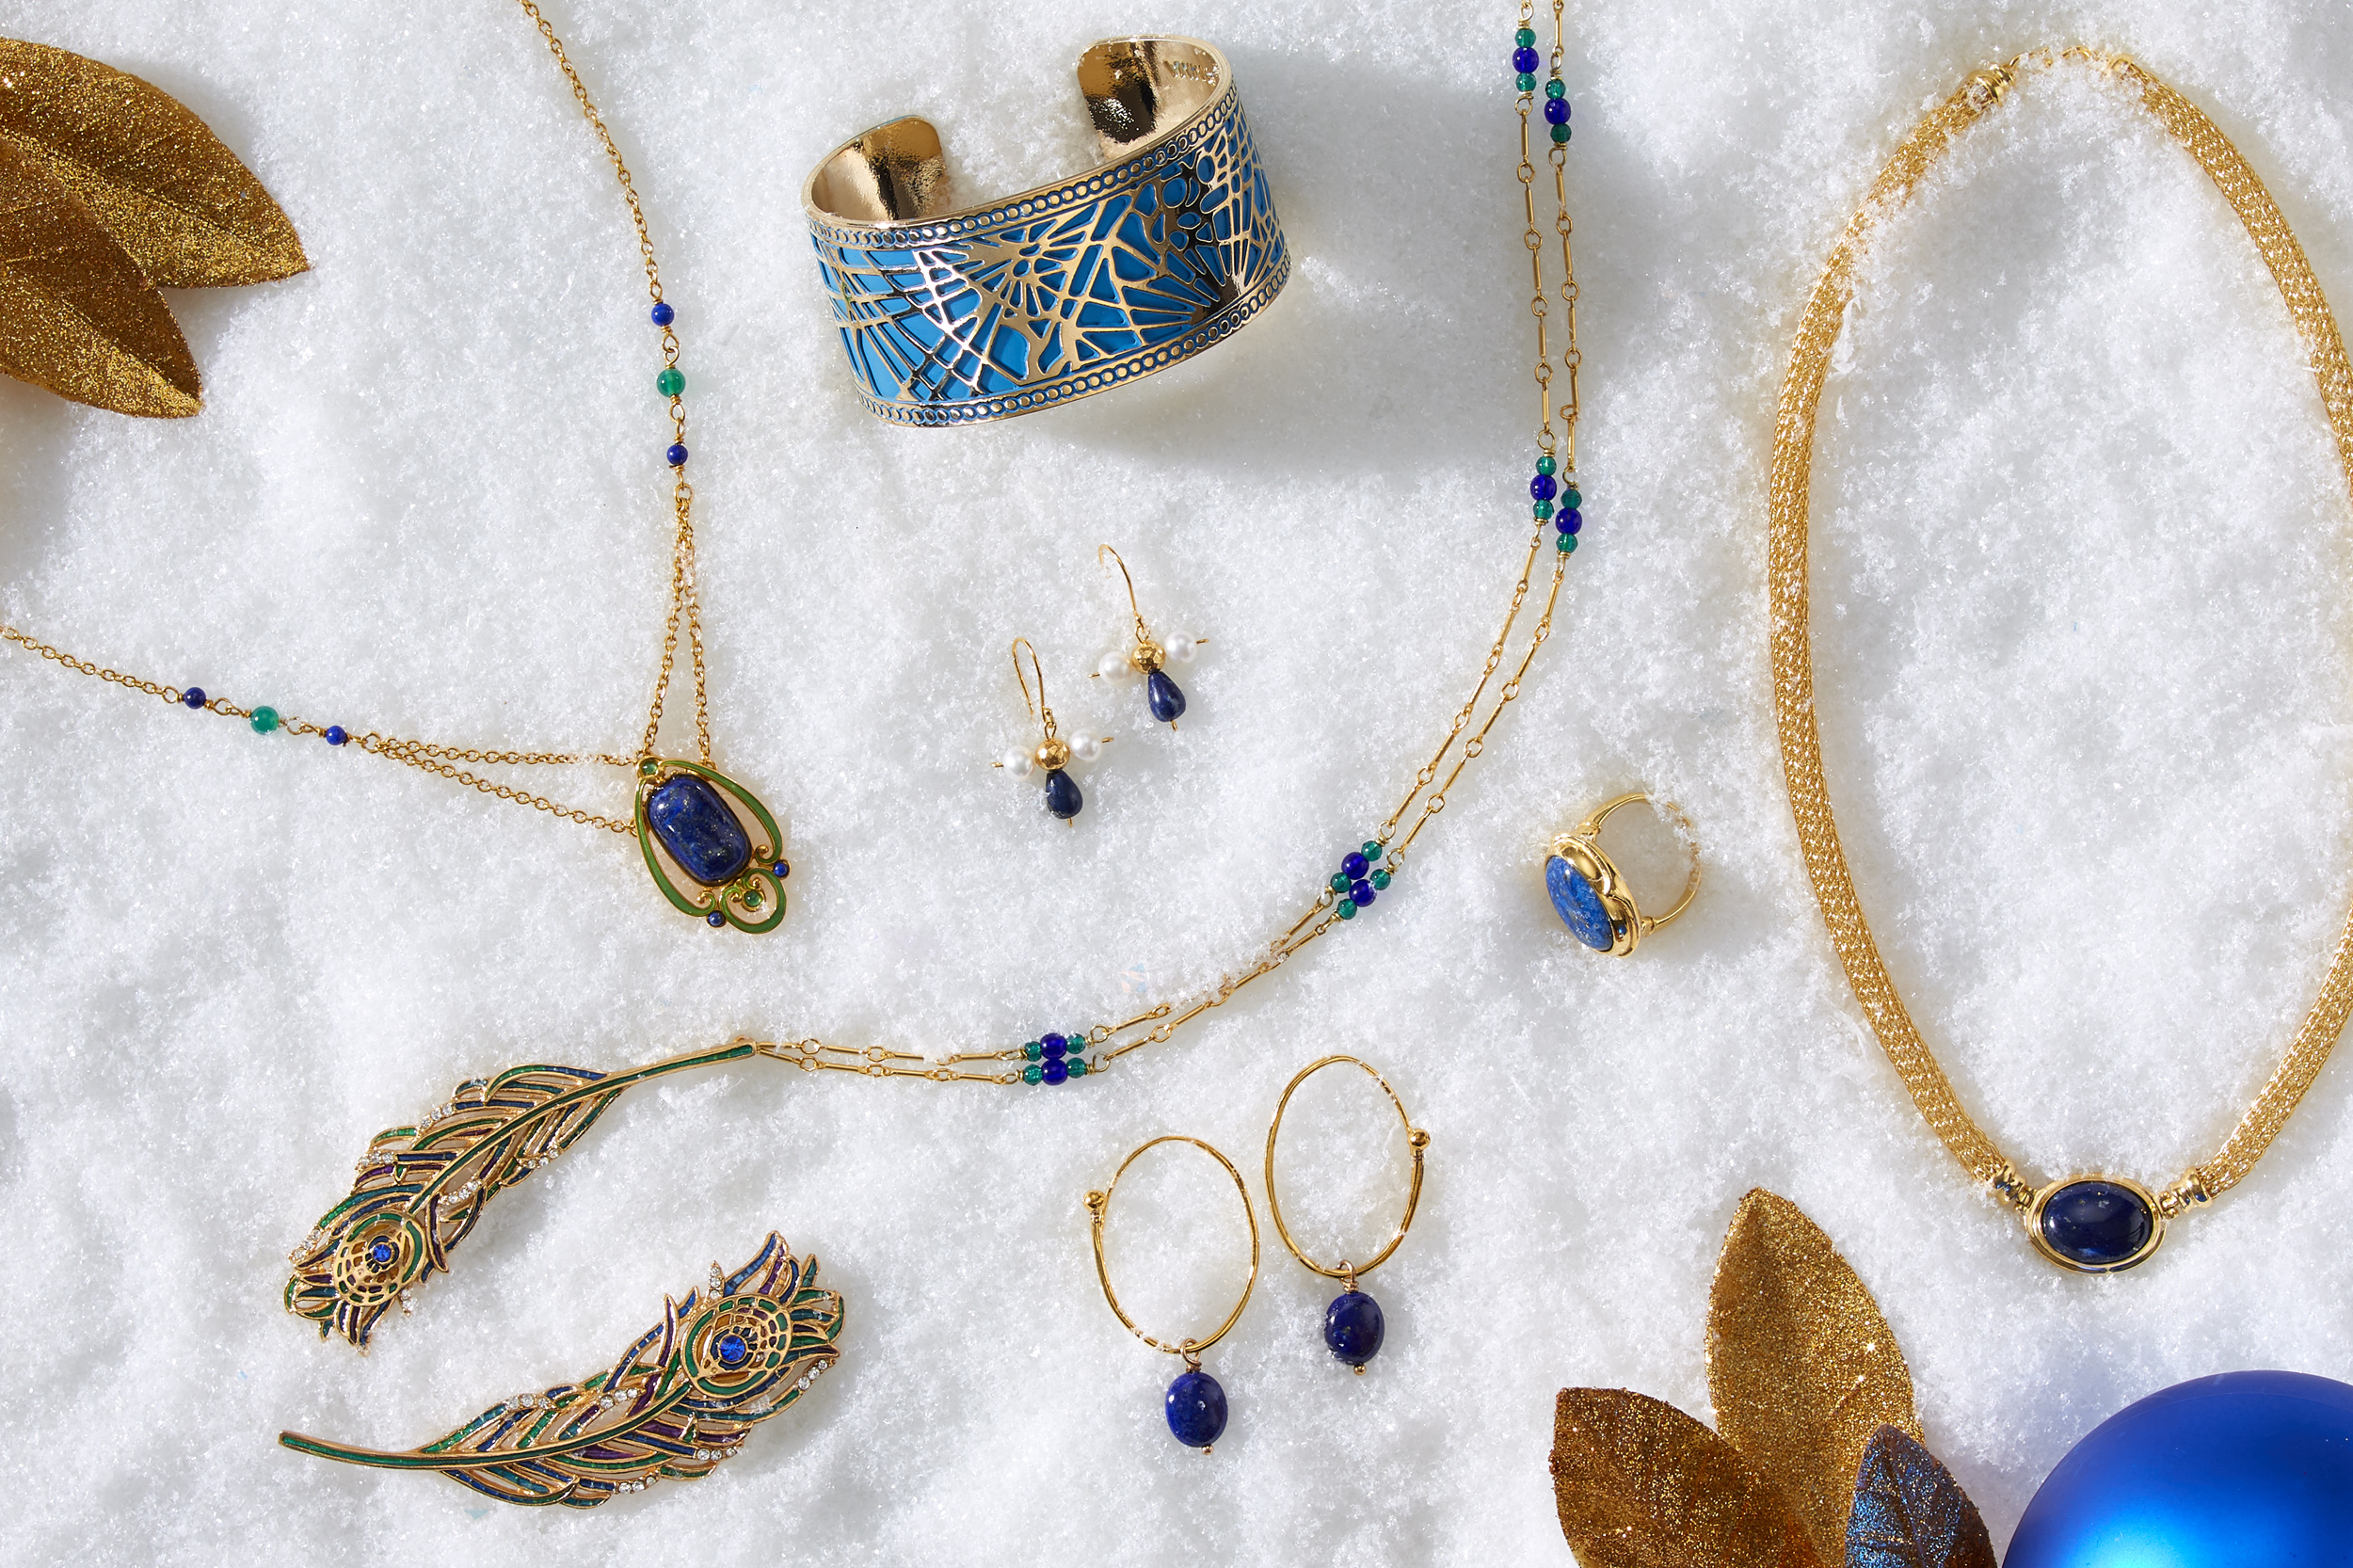 marketing still life photograph of blue, gold, and lapis jewelry including necklaces, earrings, a ring, a bracelet, and a pin on snow